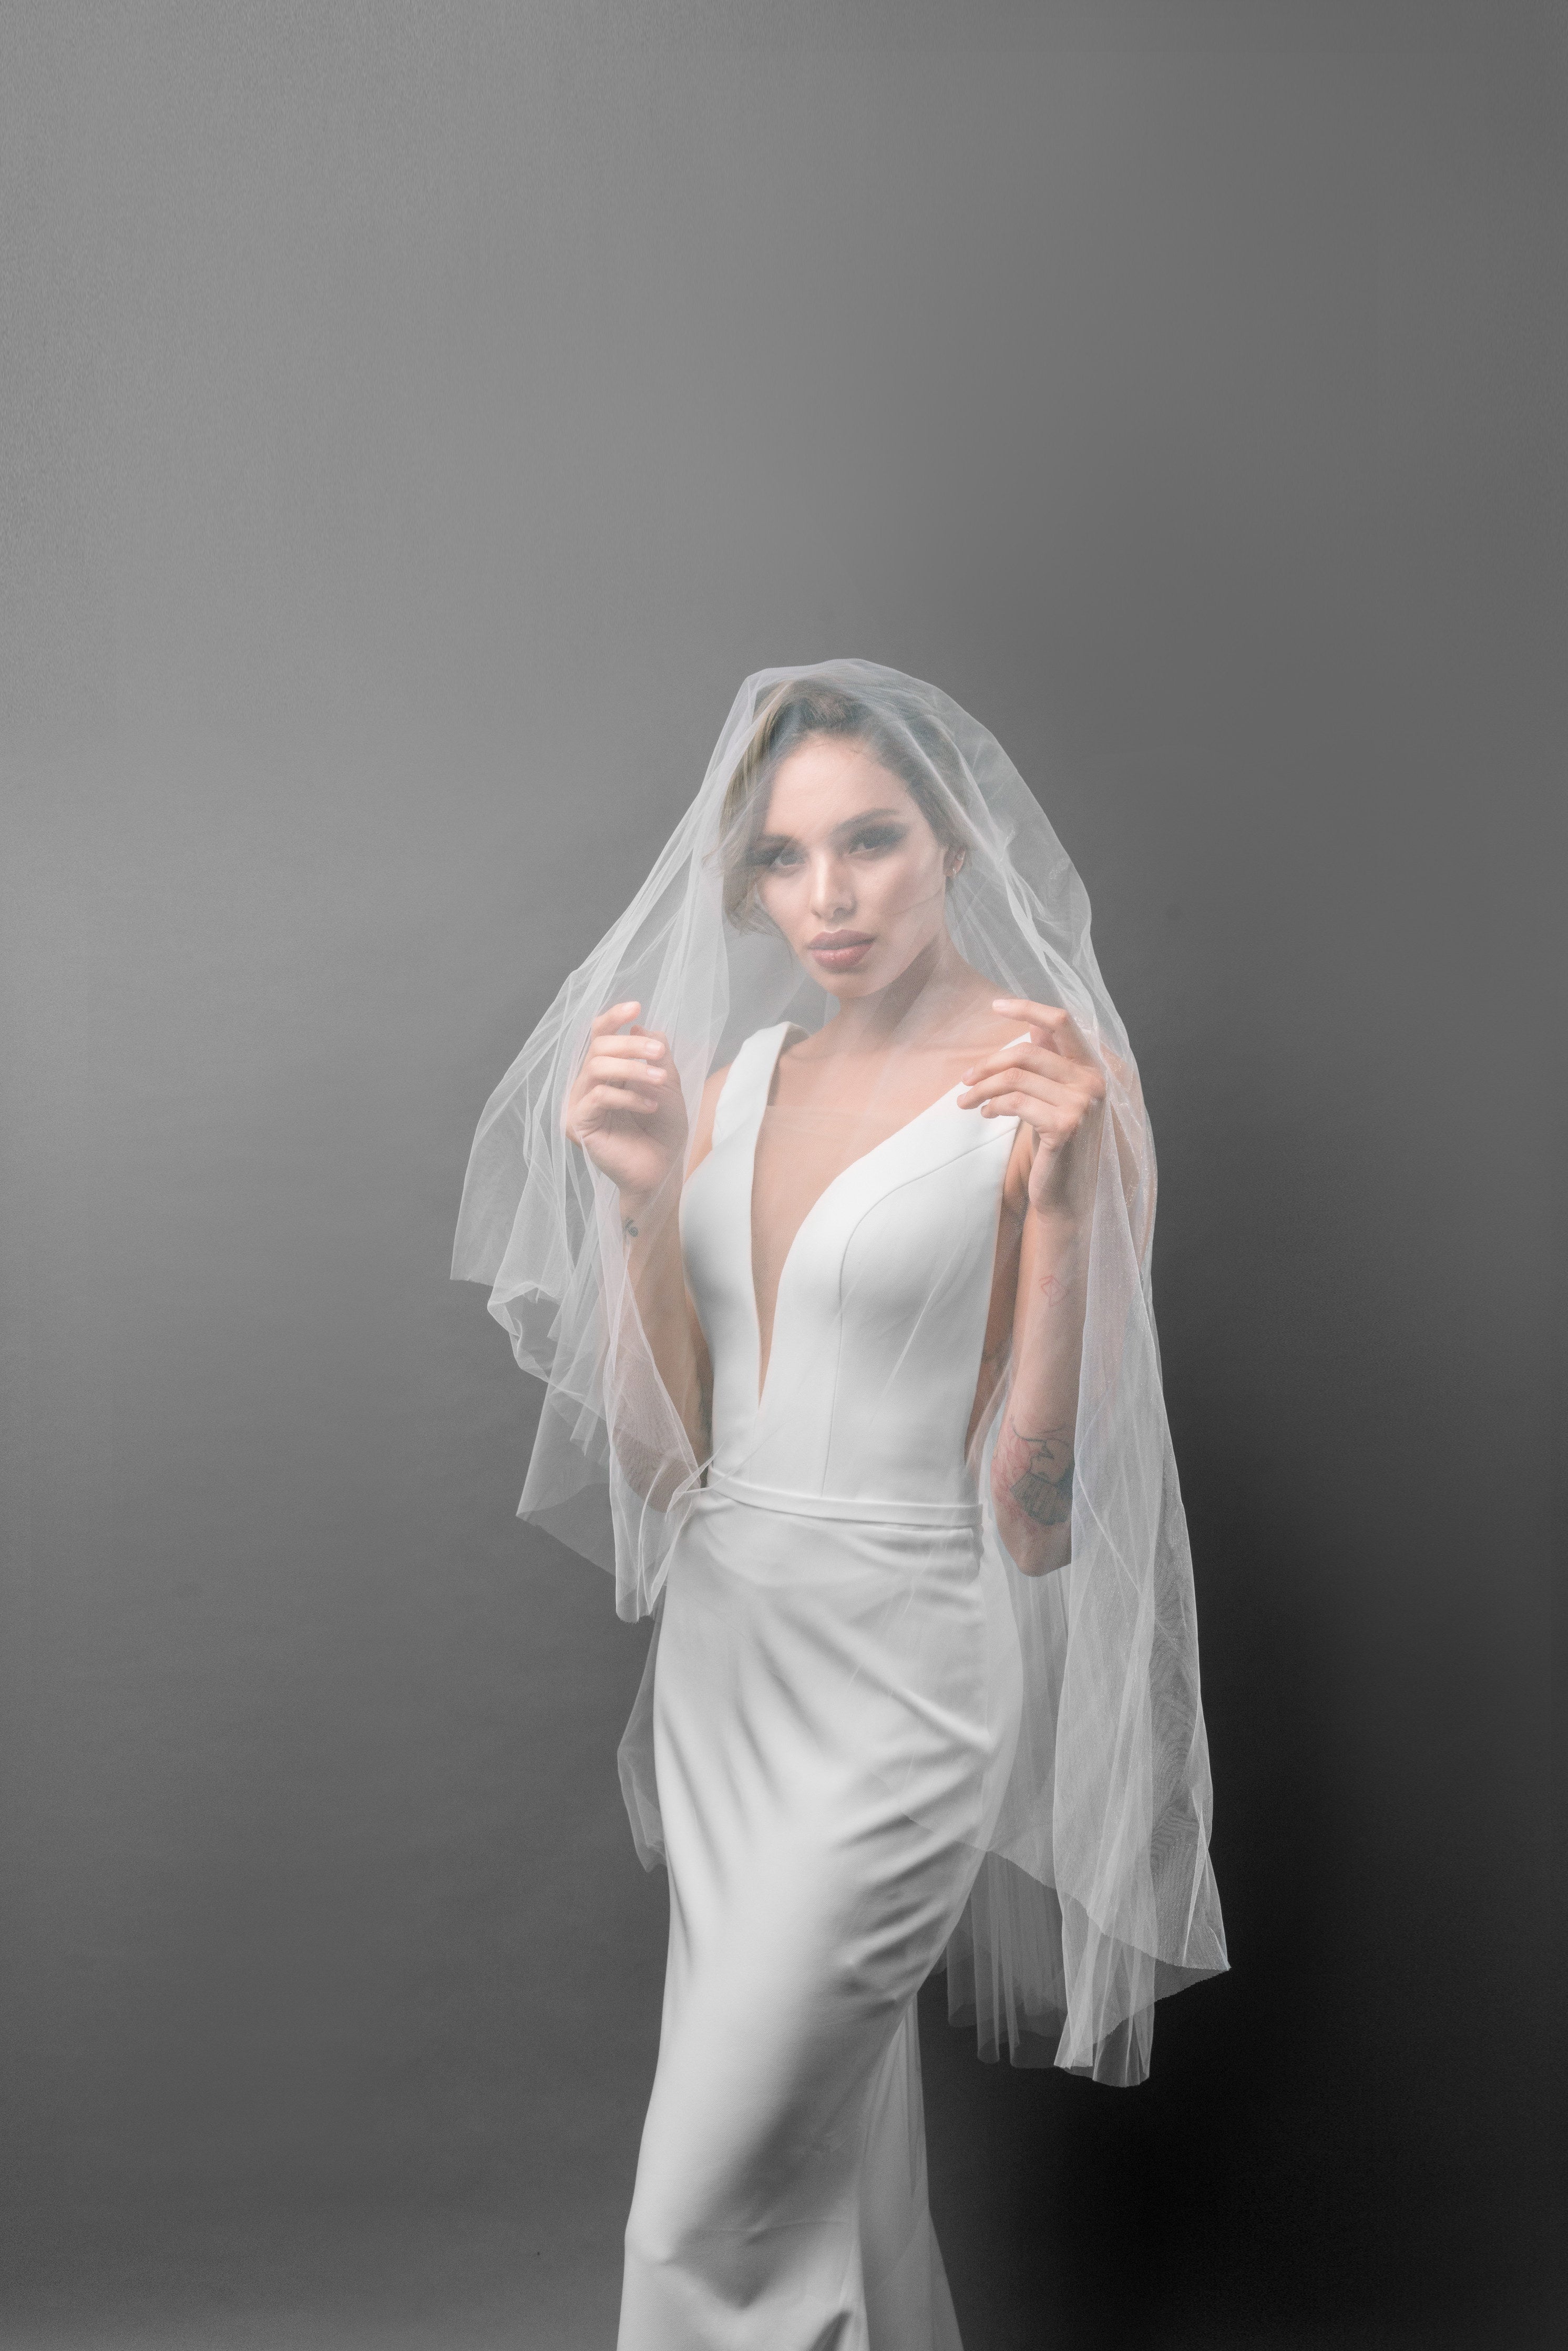 Simple 2 Tier Drop Wedding Veil with Blusher - Available in Different Lengths - Maxima Bridal